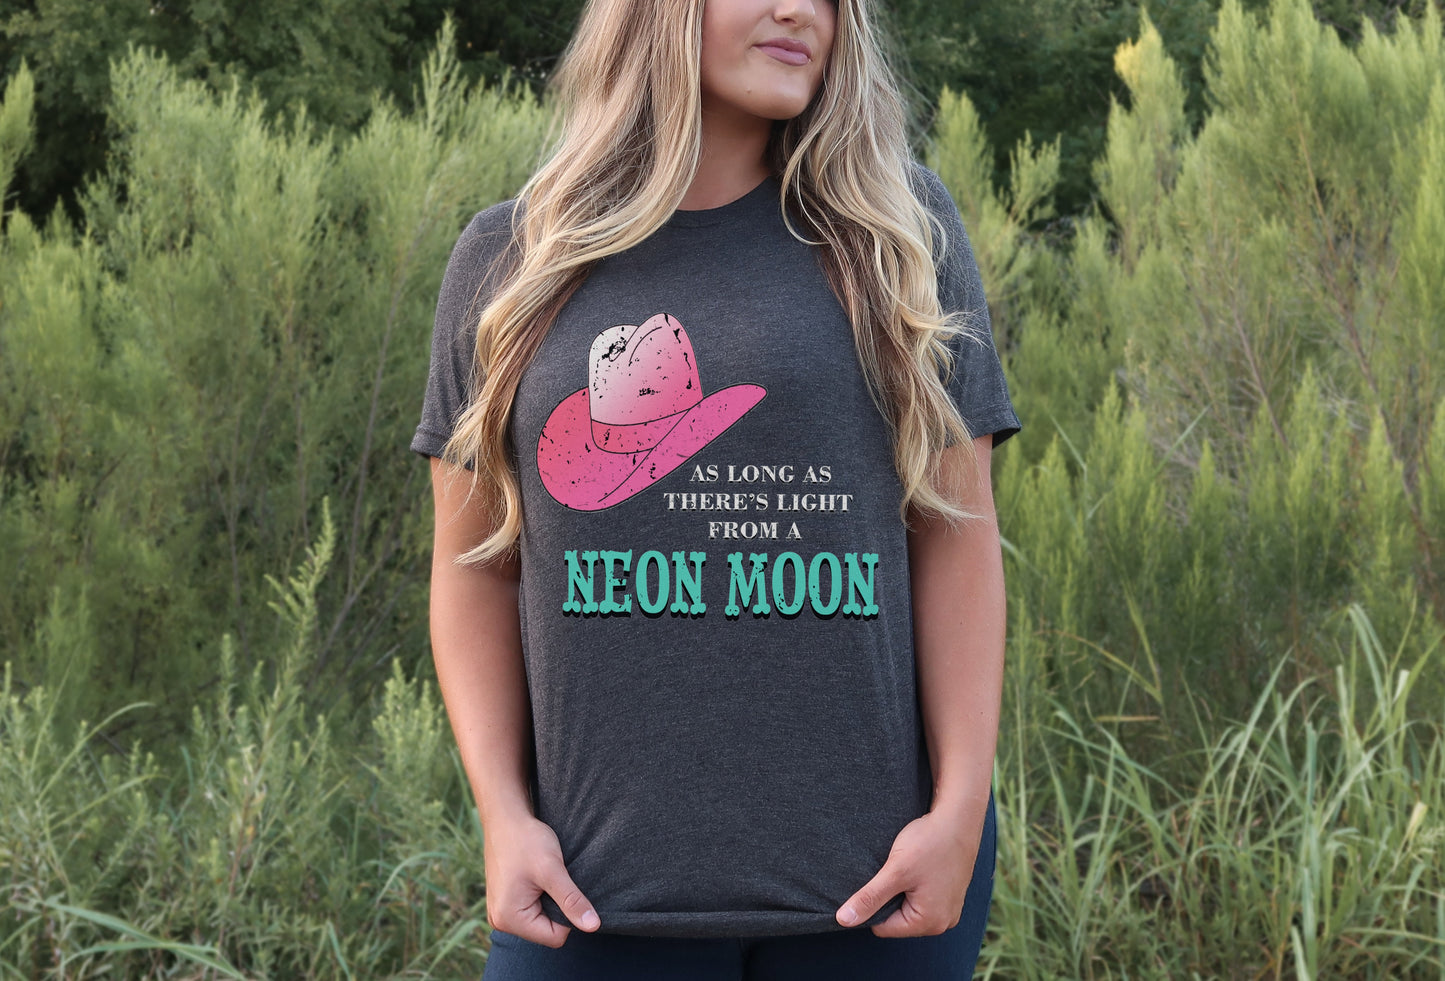 As Long As There's Light From A Neon Moon Tee /Vintage Country Style Shirt / Rocker Vintage Bella Tee